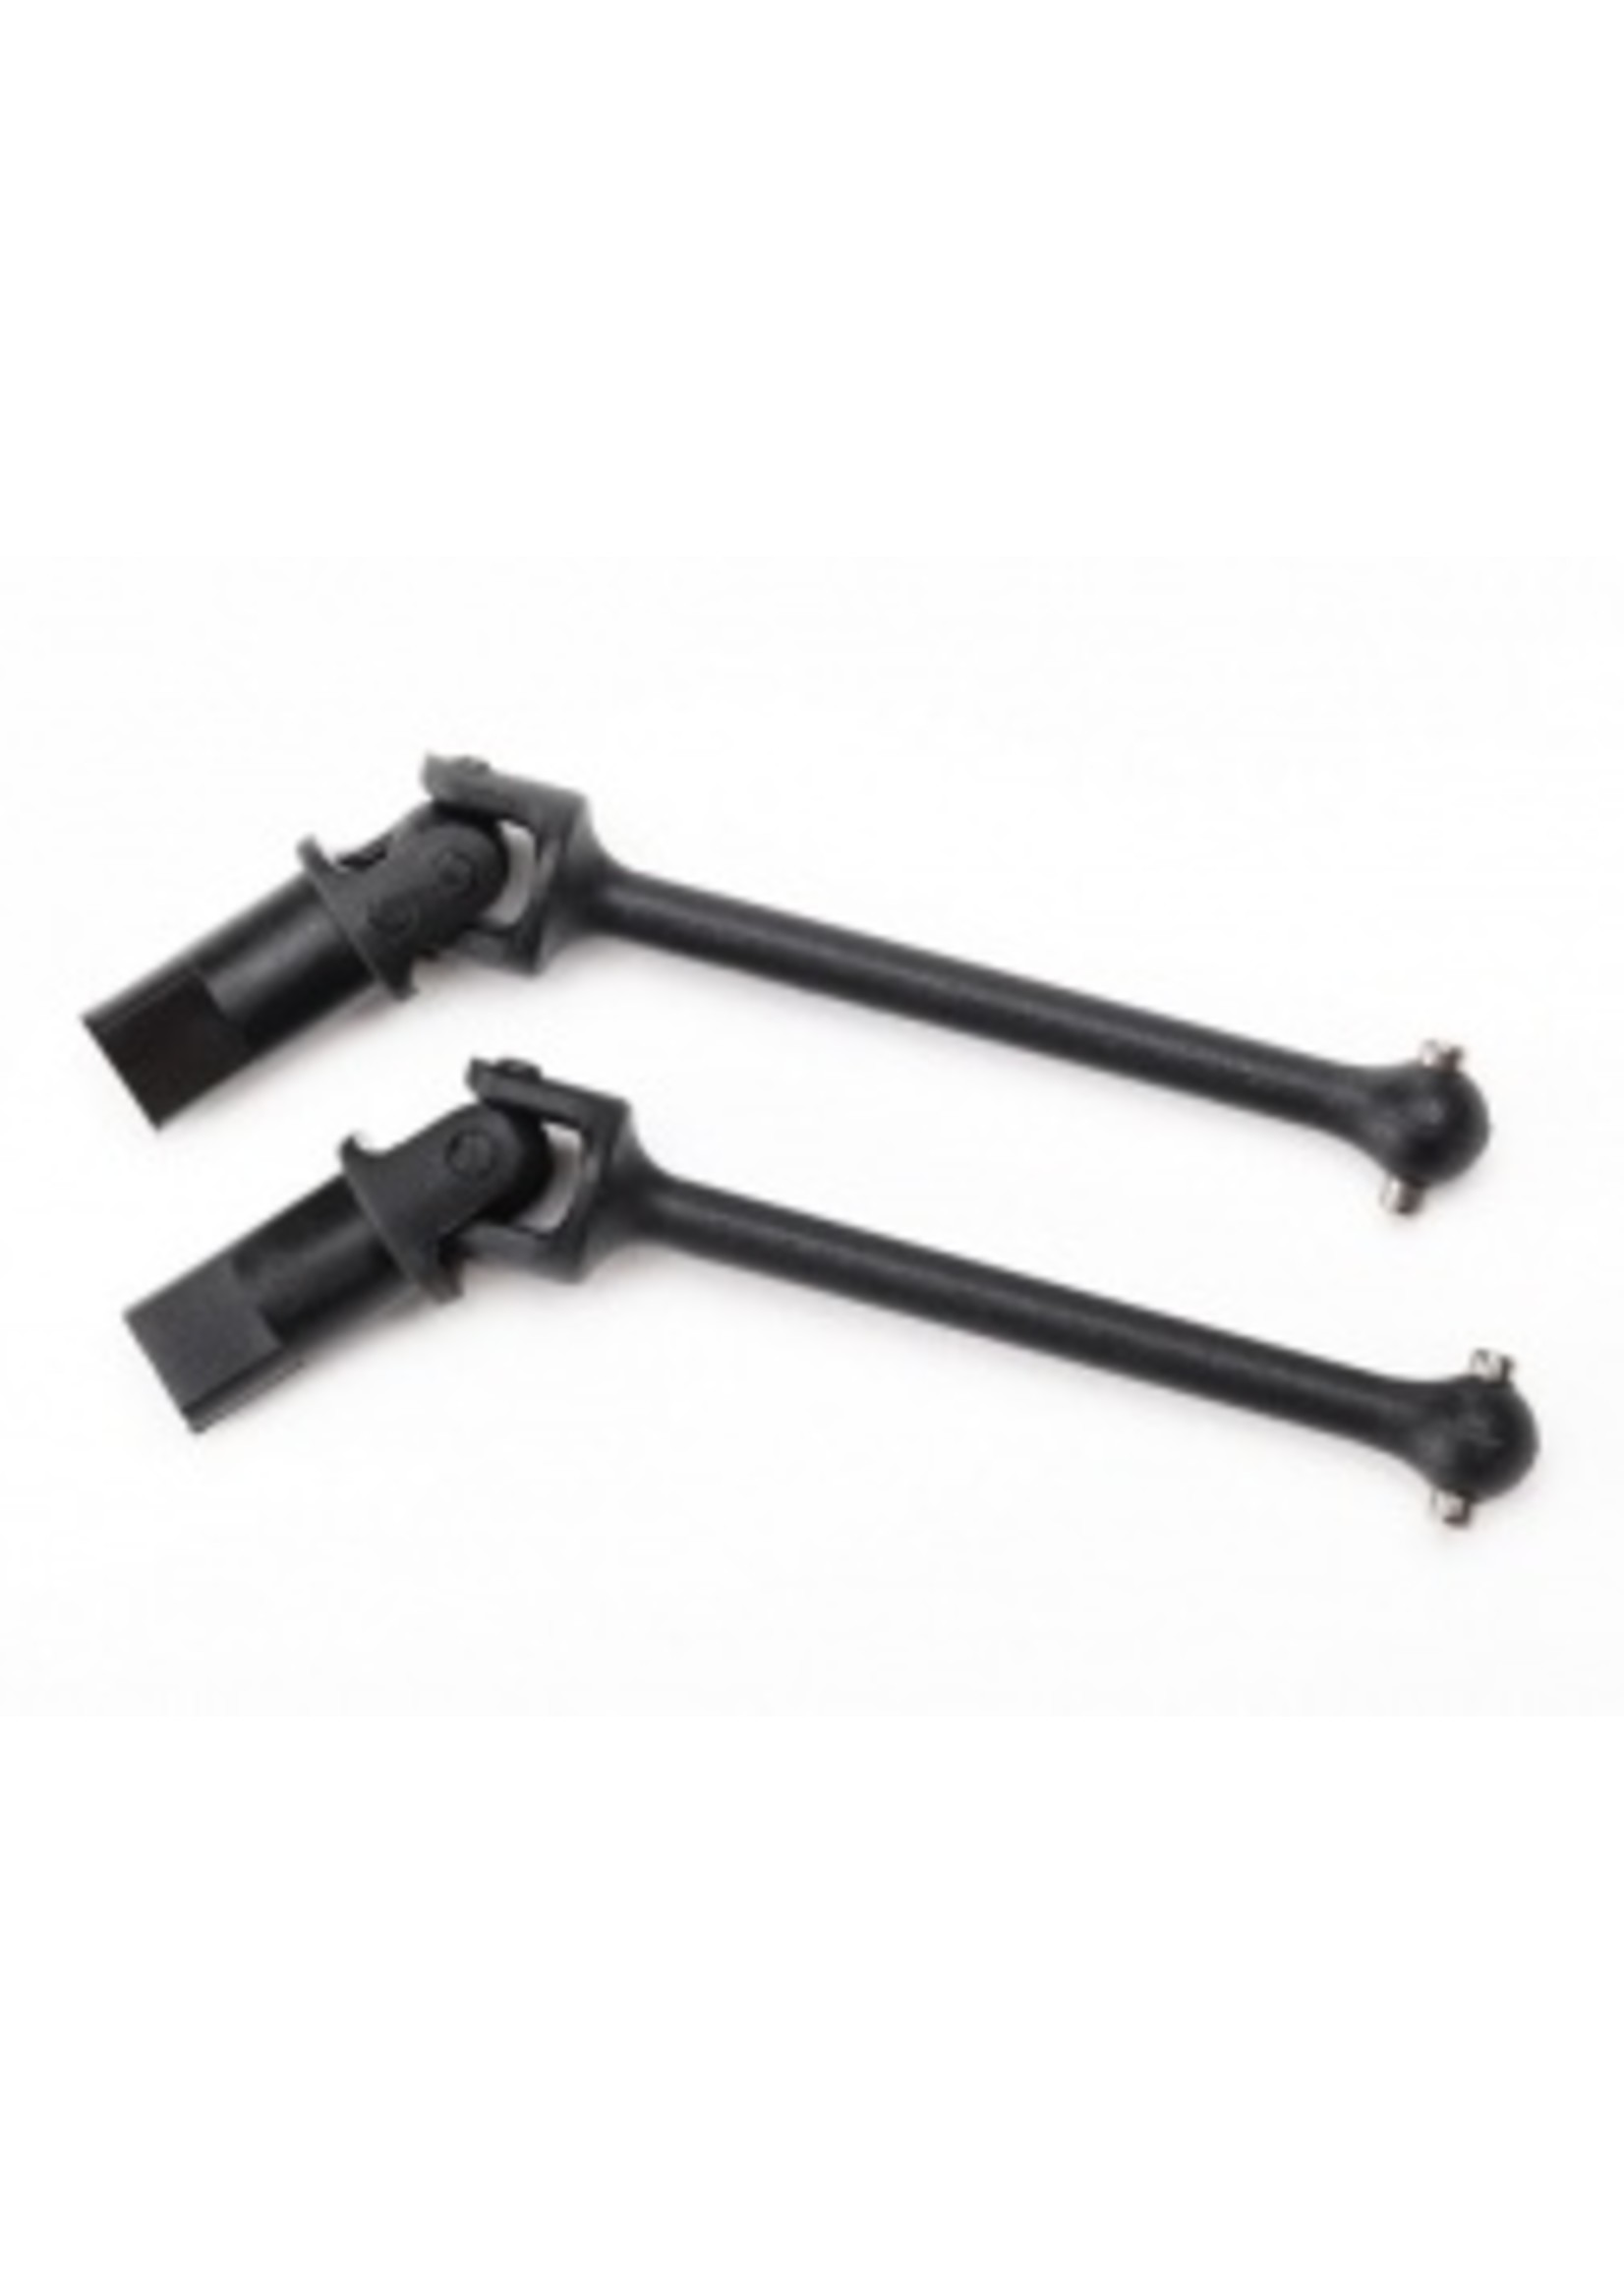 Traxxas 7650 - Driveshaft Assembly, Front or Rear